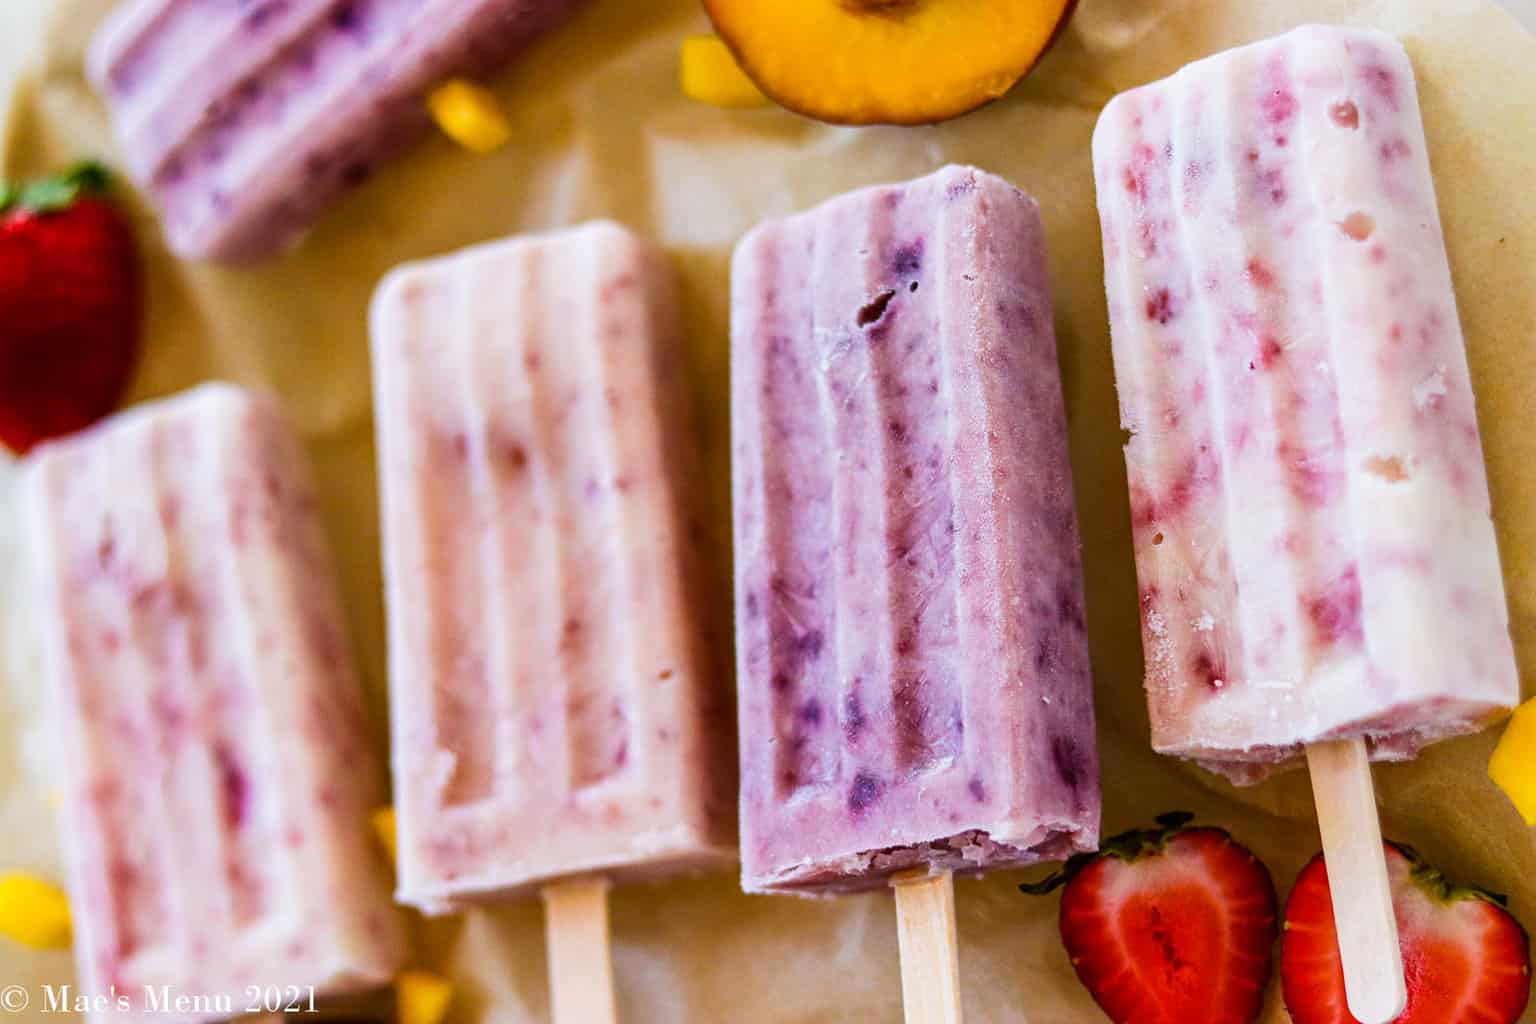 A horizontal shot of 4 yogurt popsicles surrounded by fruit